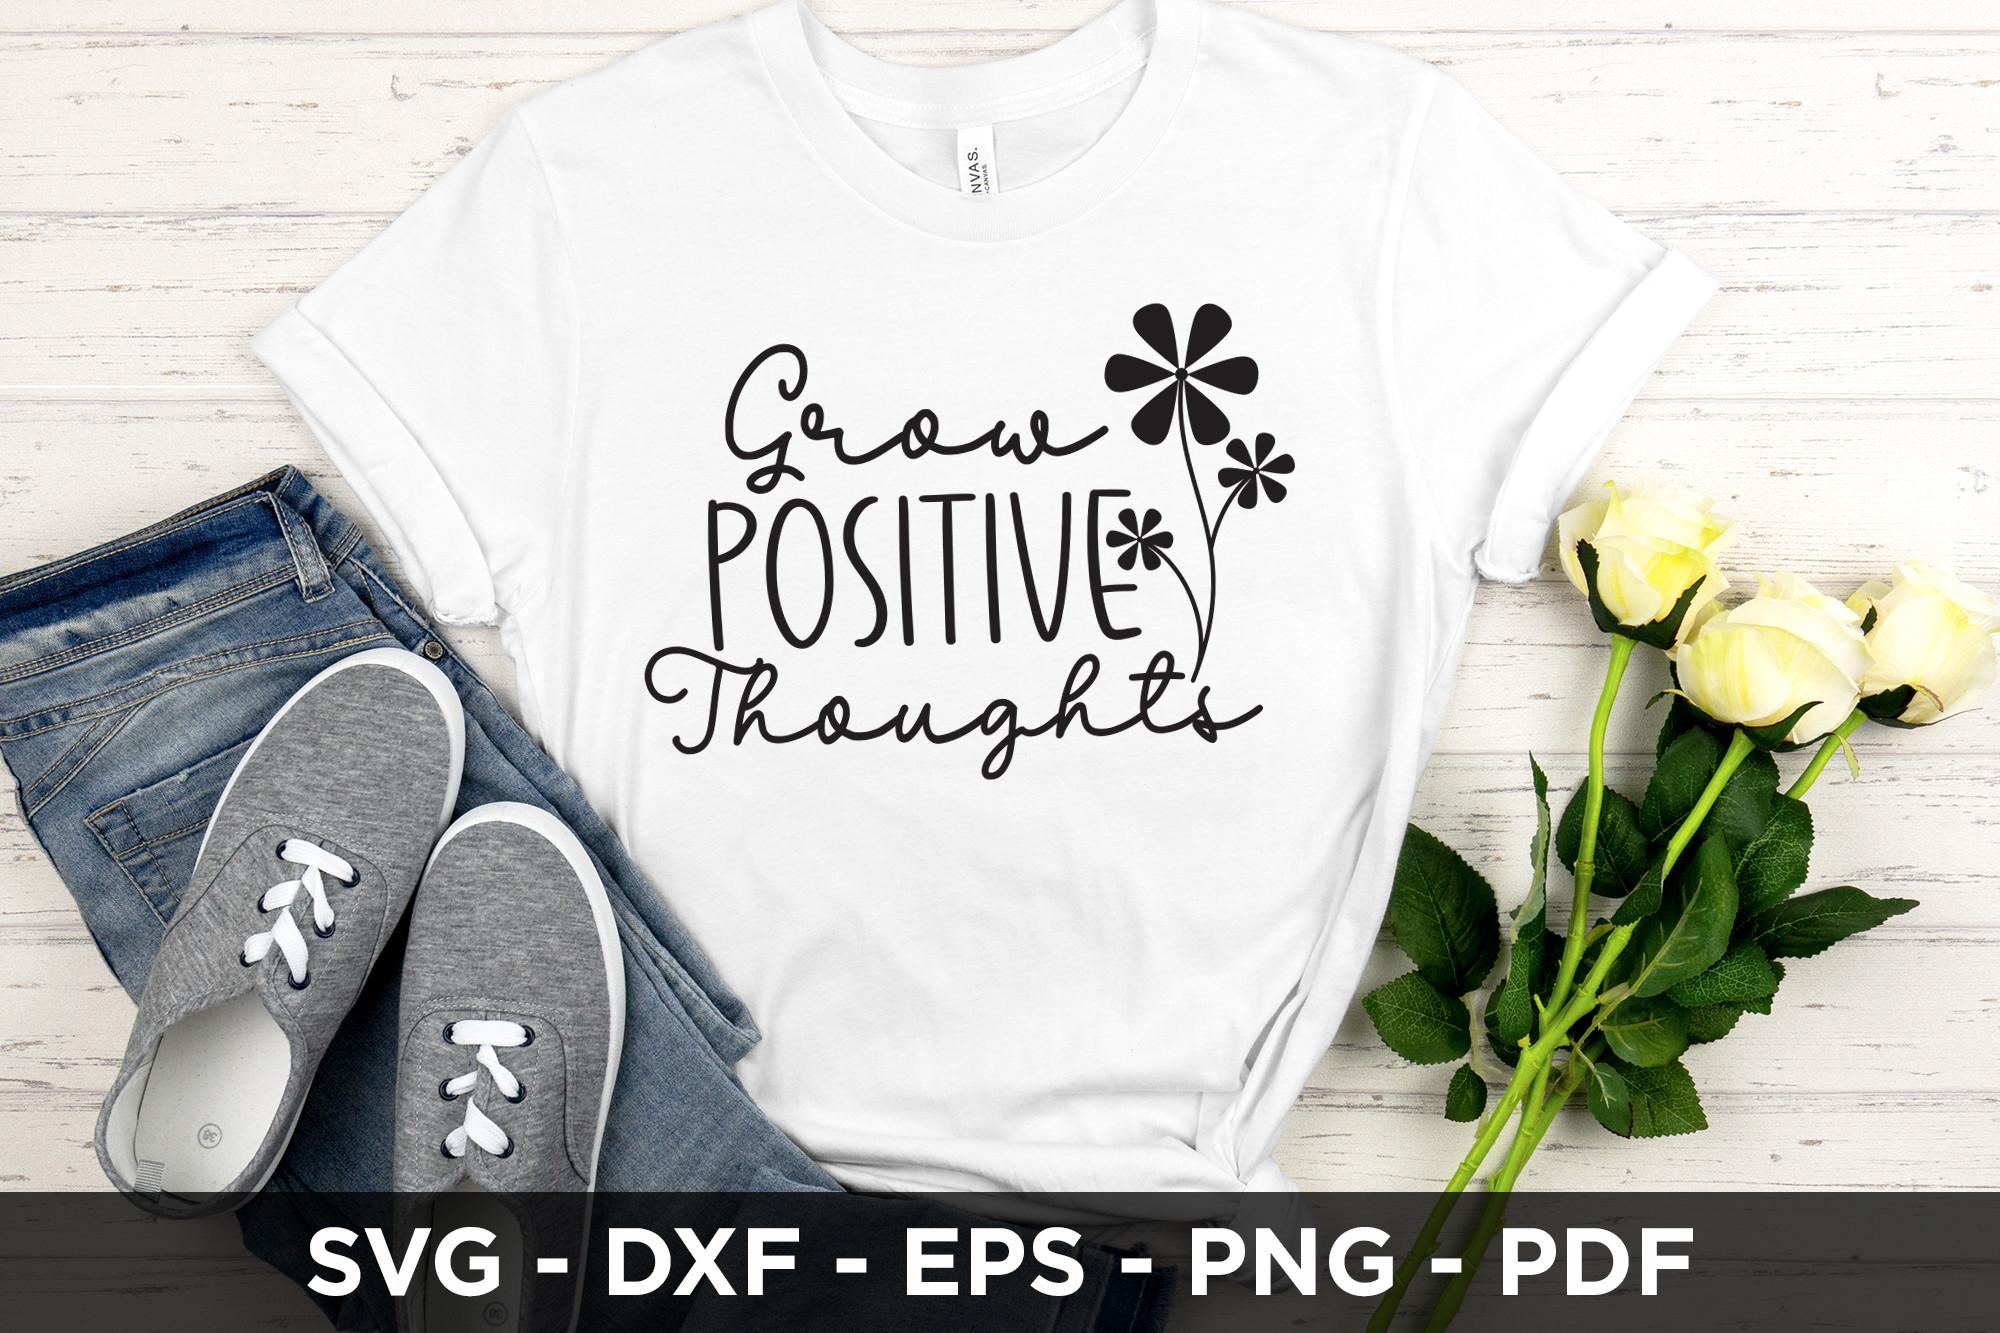 Grow Positive Thoughts - SVG Cut File